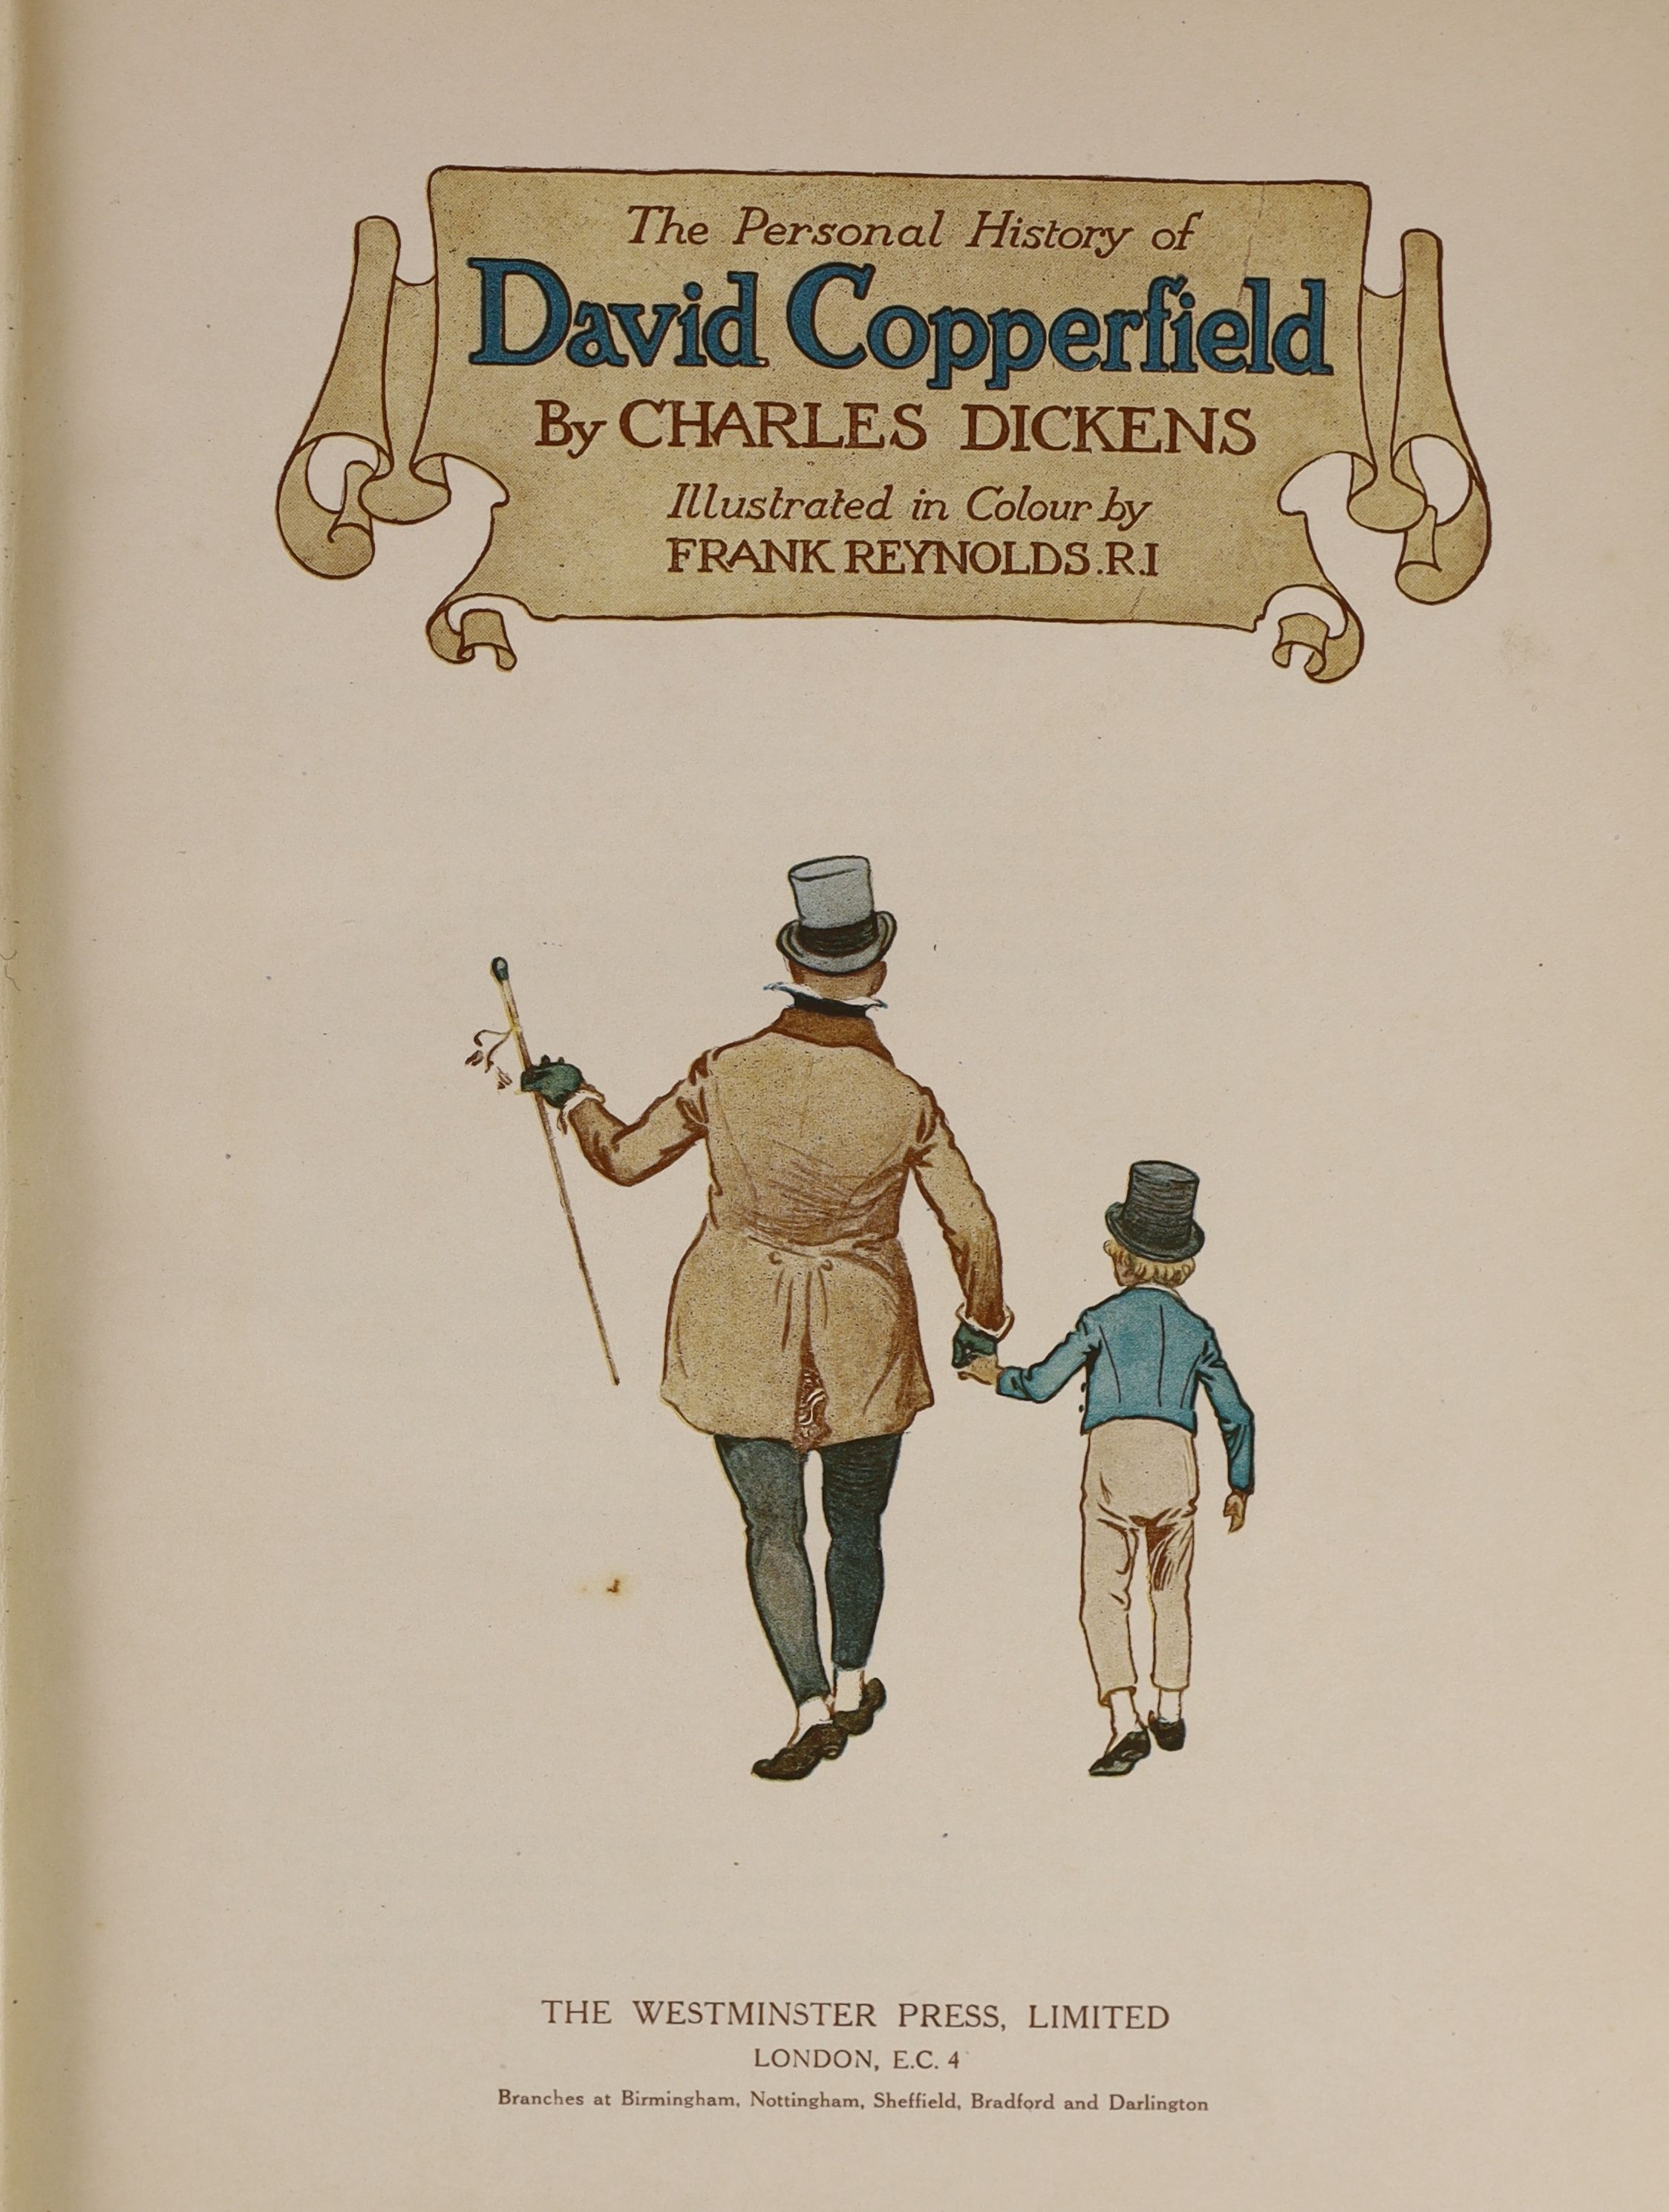 Dickens, Charles - The Personal History of David Copperfield, illustrated with 20 tipped-in colour plates by Frank Reynolds, 4to, original red buckram with silhouette portrait, Westminster Press, London, c. 1911 and Flau